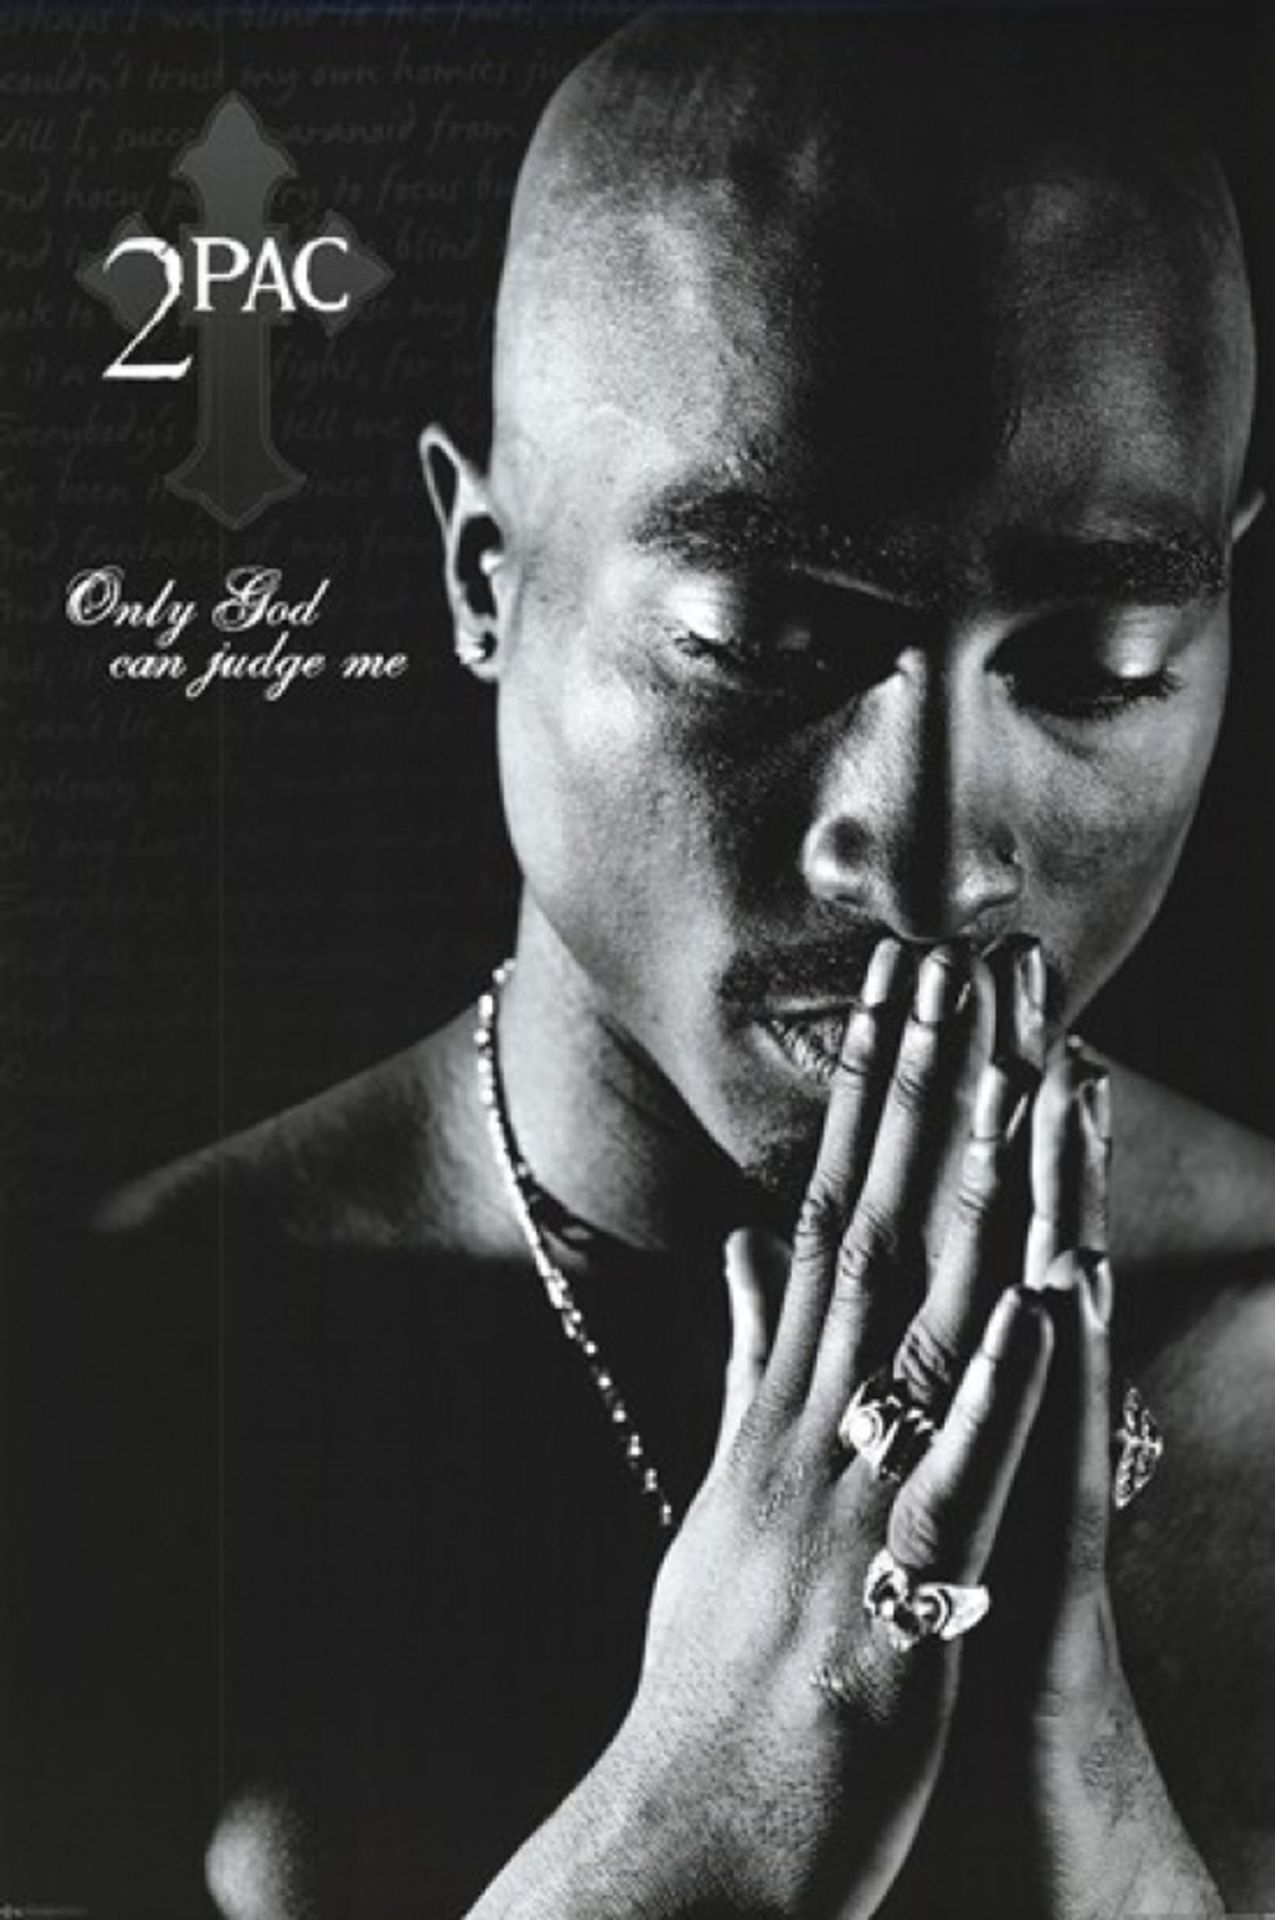 Tupac Shakur "Only God Can Judge Me" Poster